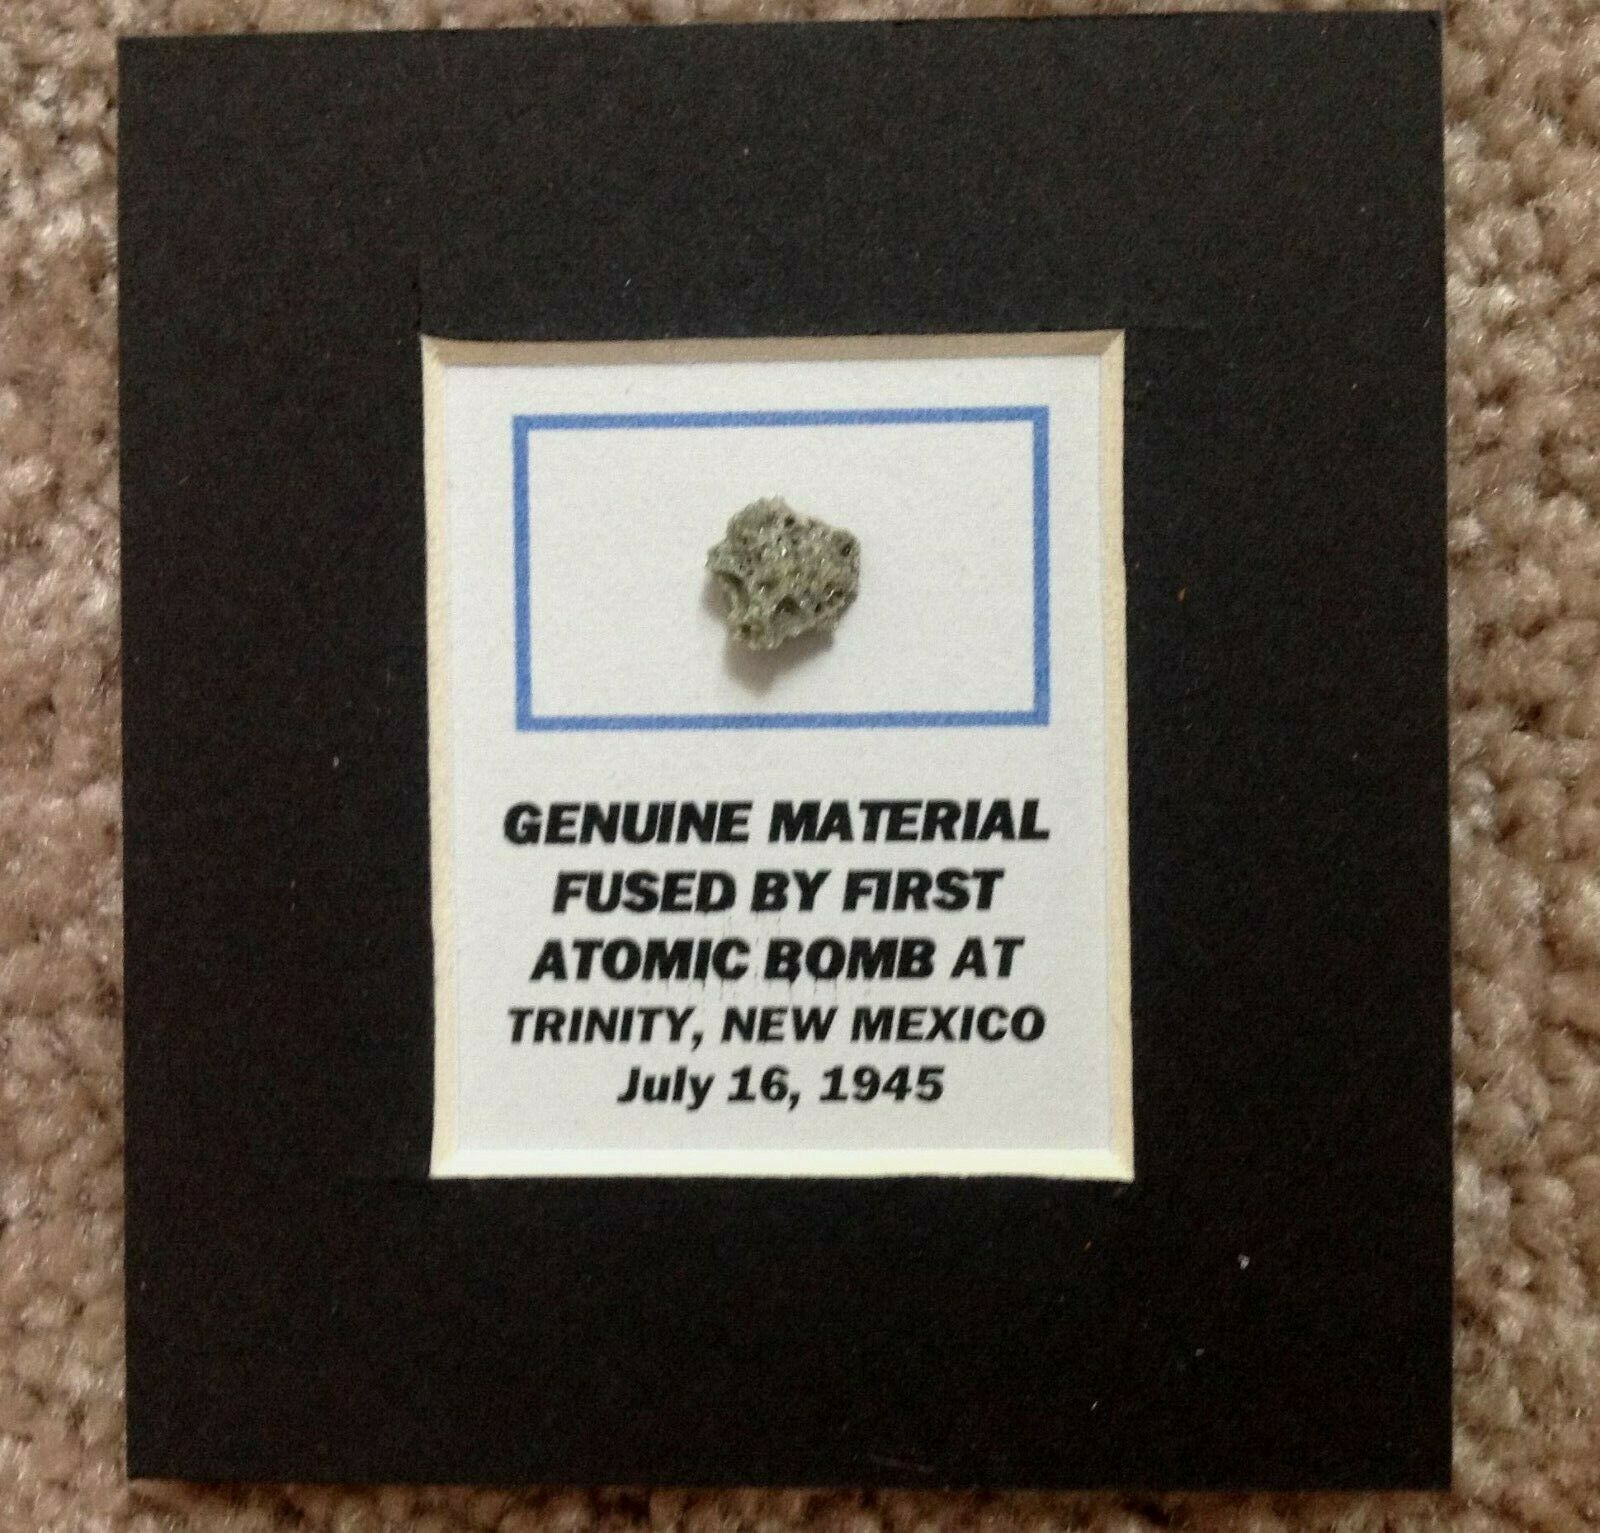 Small Piece Glassy Material Fused  By 1st Atomic Bomb Near Trinity July 16,1945